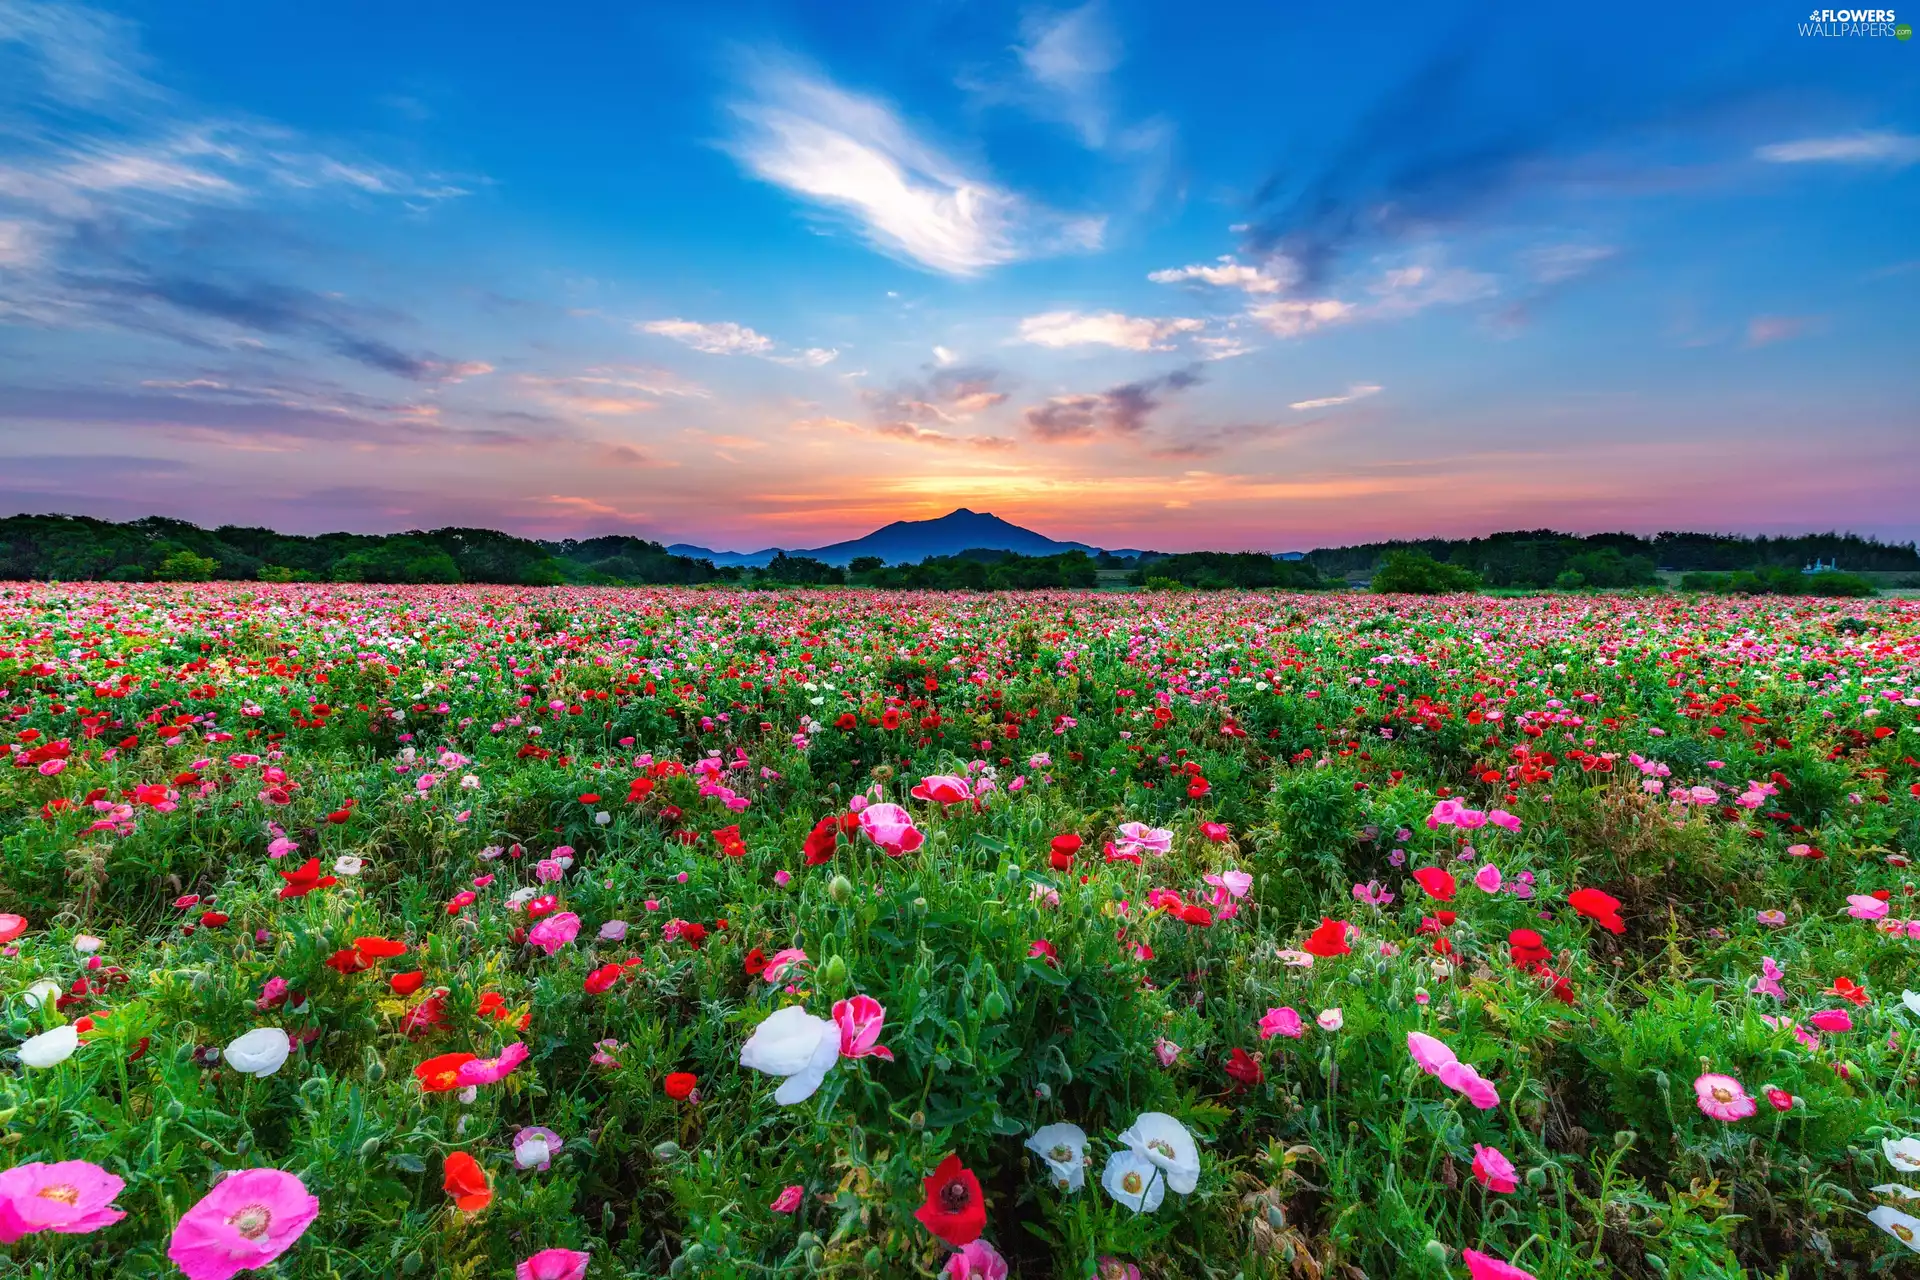 The Hills, Great Sunsets, Flowers, papavers, Meadow